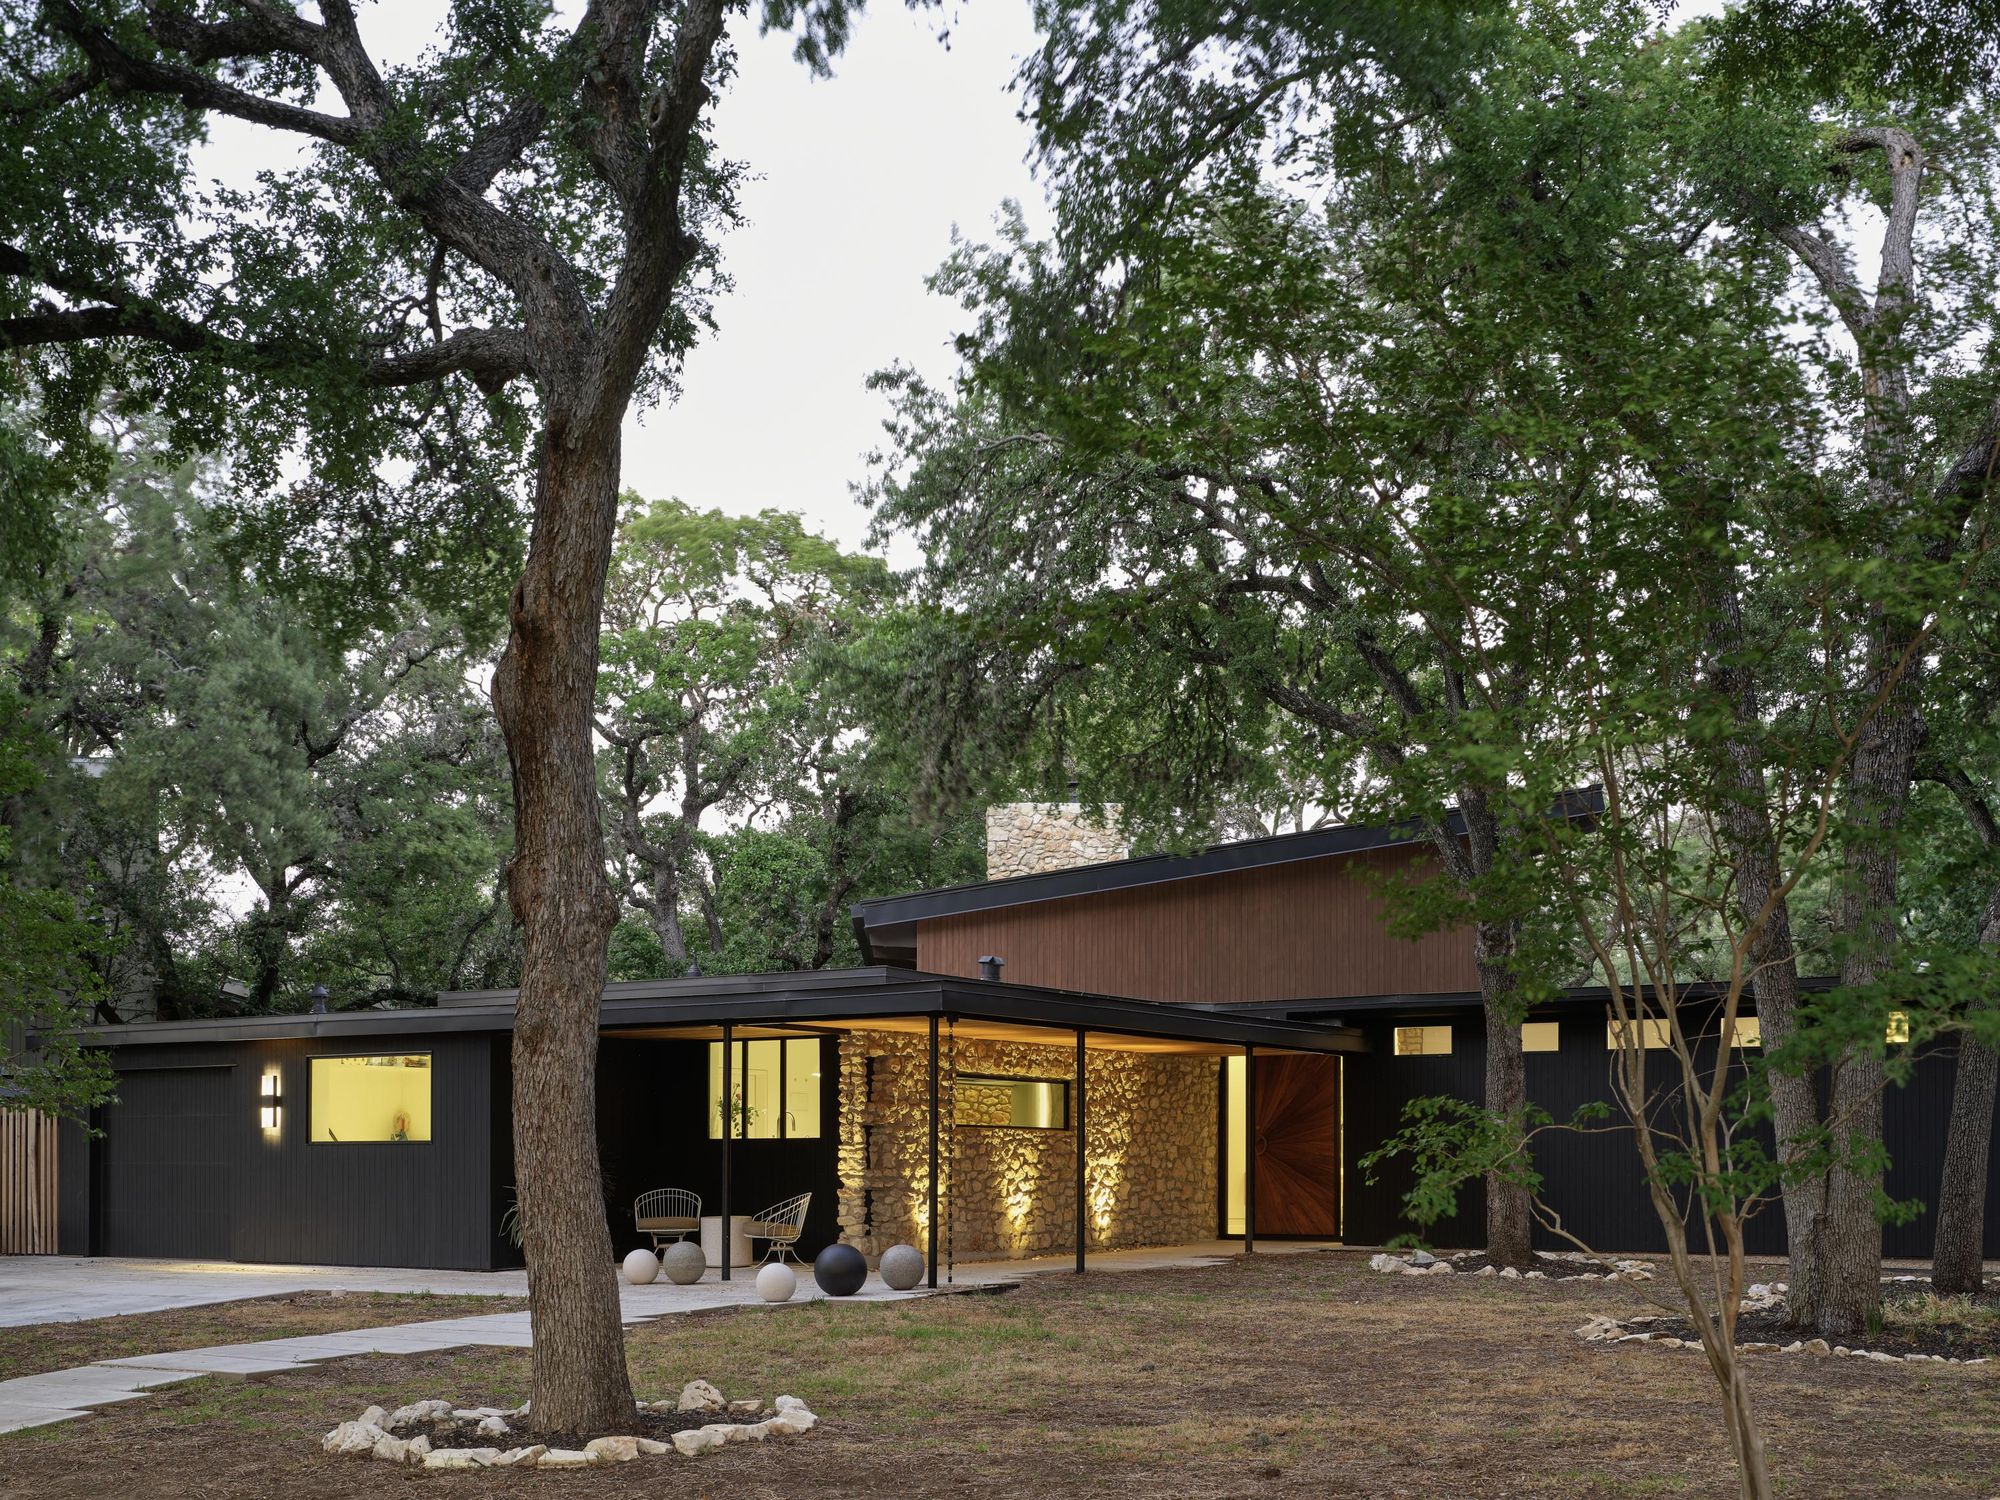 A home on the AIA Austin Homes Tour.